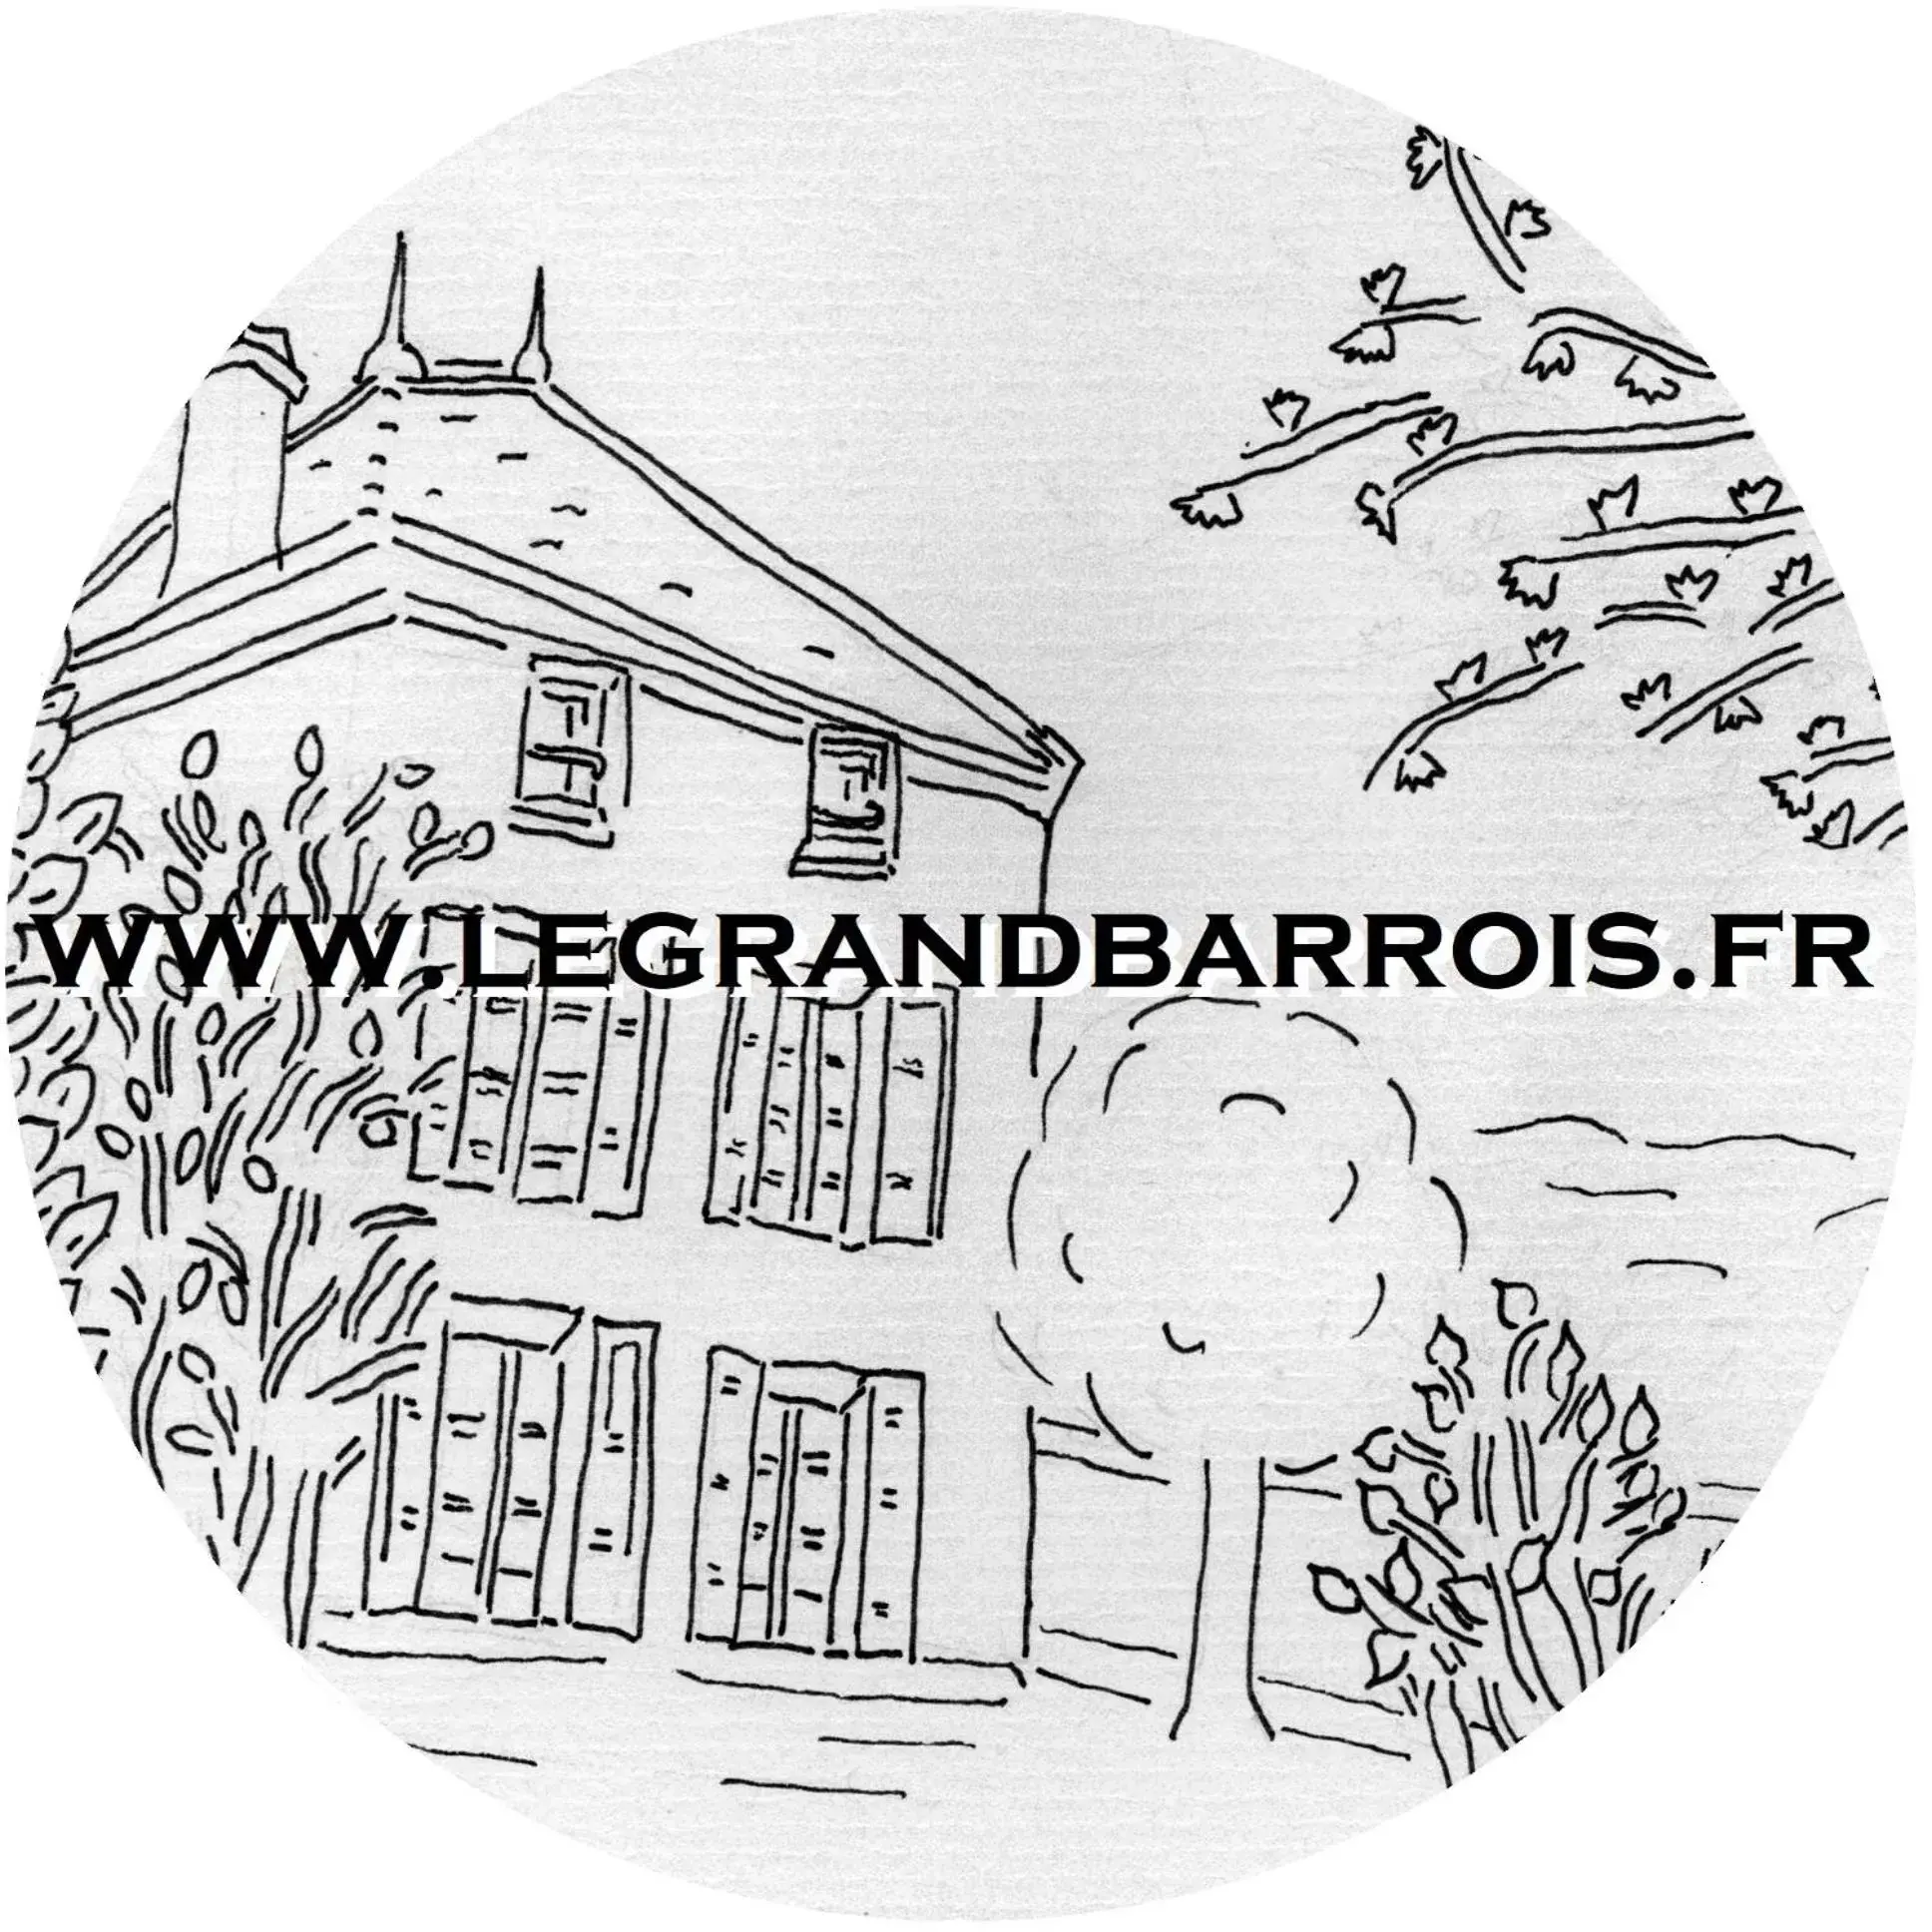 Property logo or sign, Property Logo/Sign in Le Grand Barrois